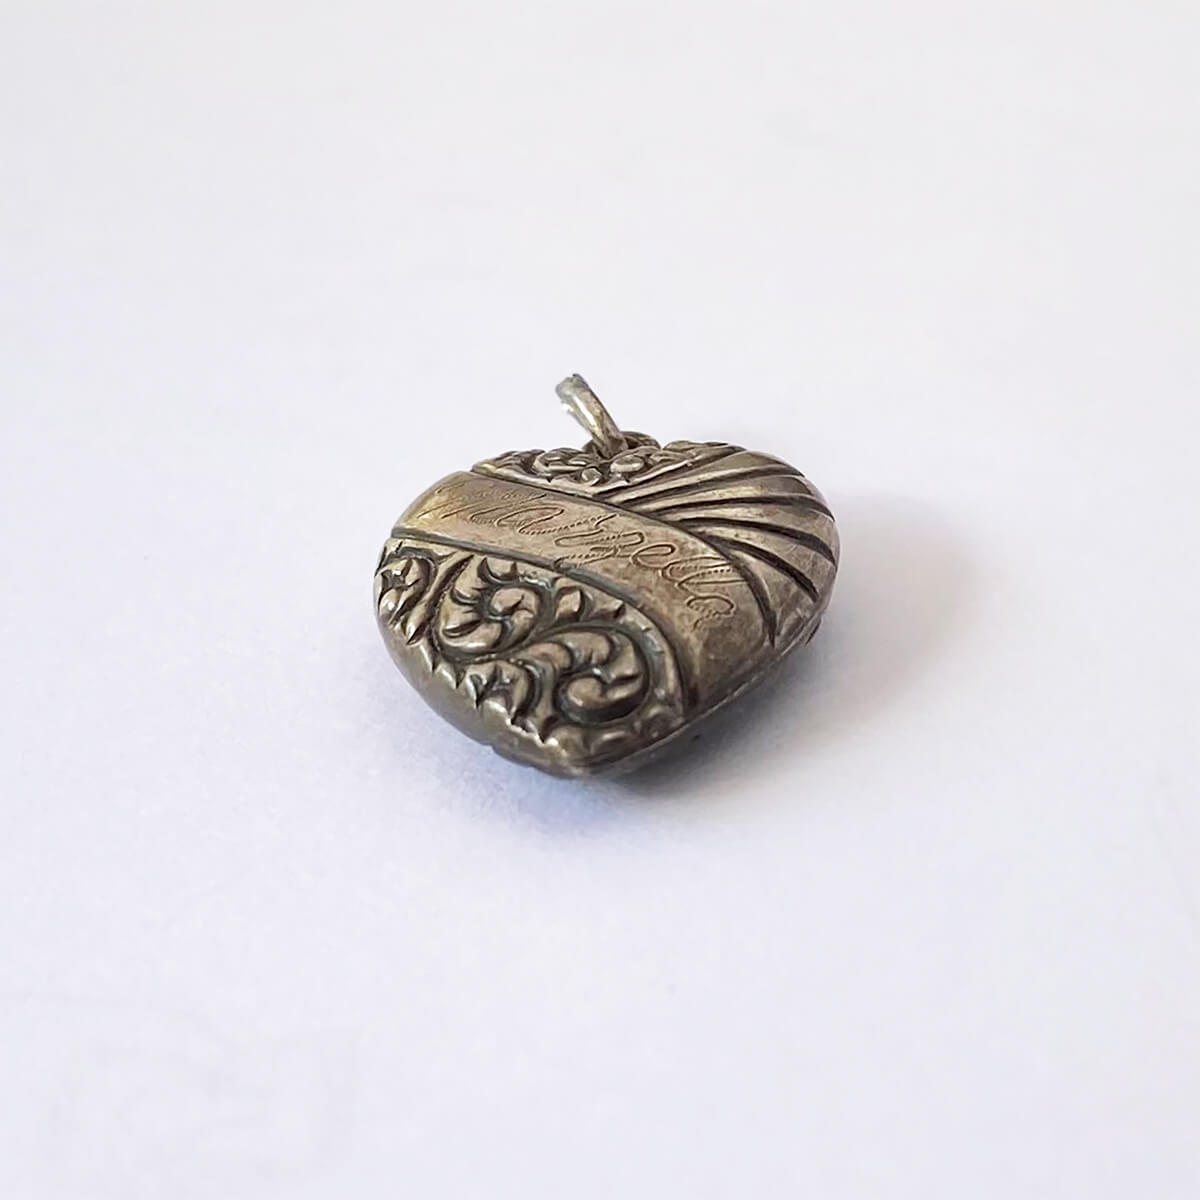 Vintage sterling silver puffed heart charm 1940s engraved pattern